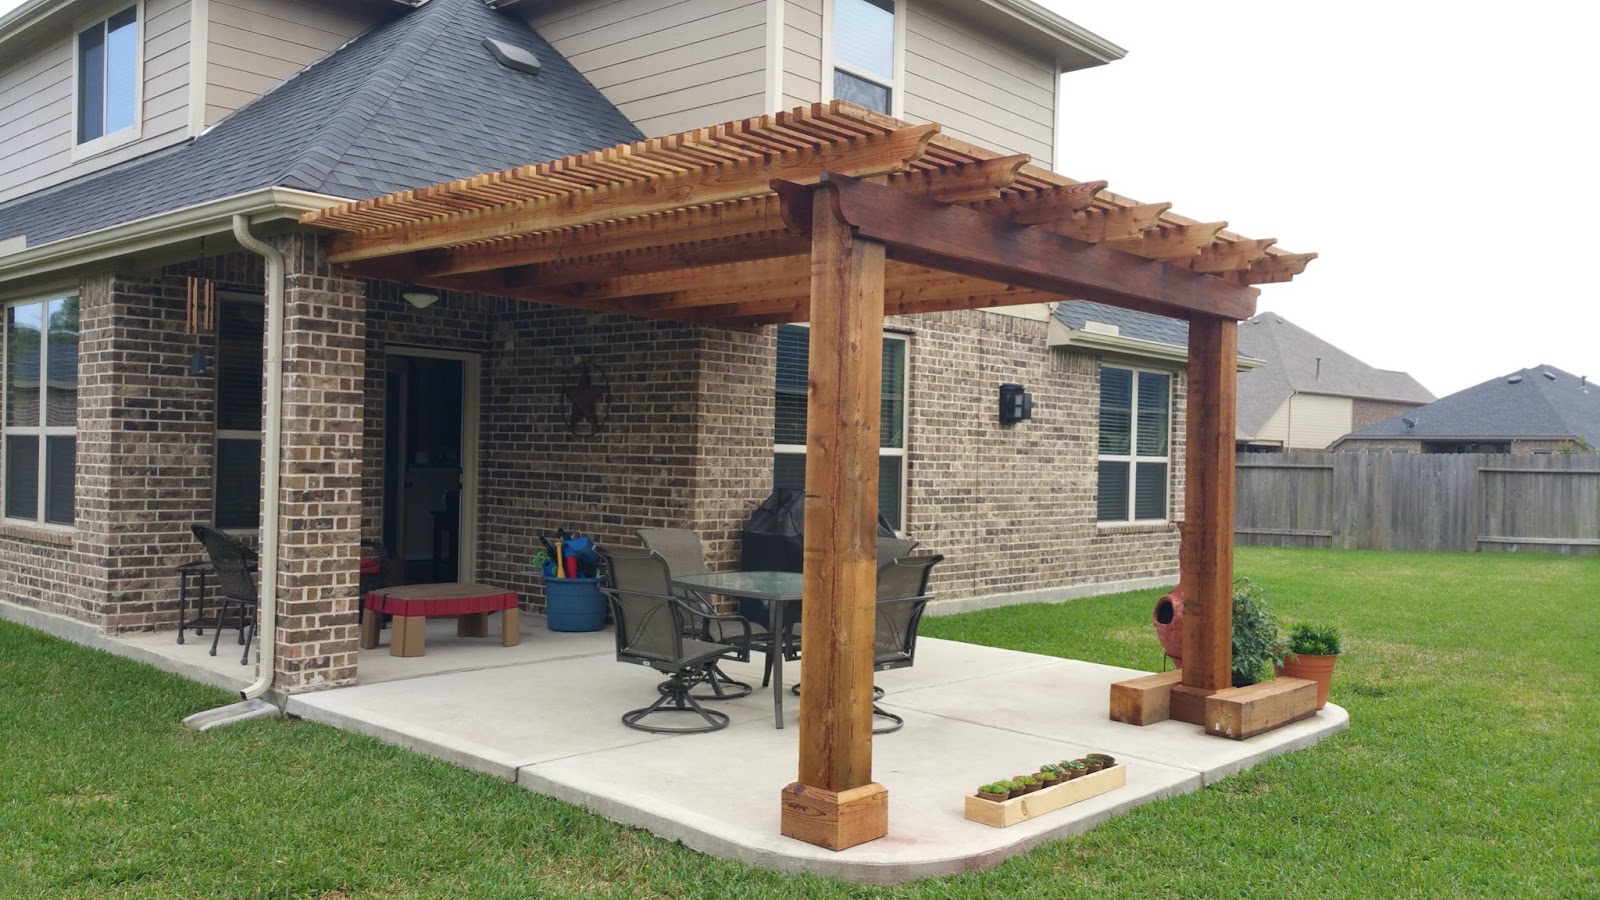 Patios, Pools, & Gazebos: 5 Ways to Level up Your Backyard Roofing for Summer